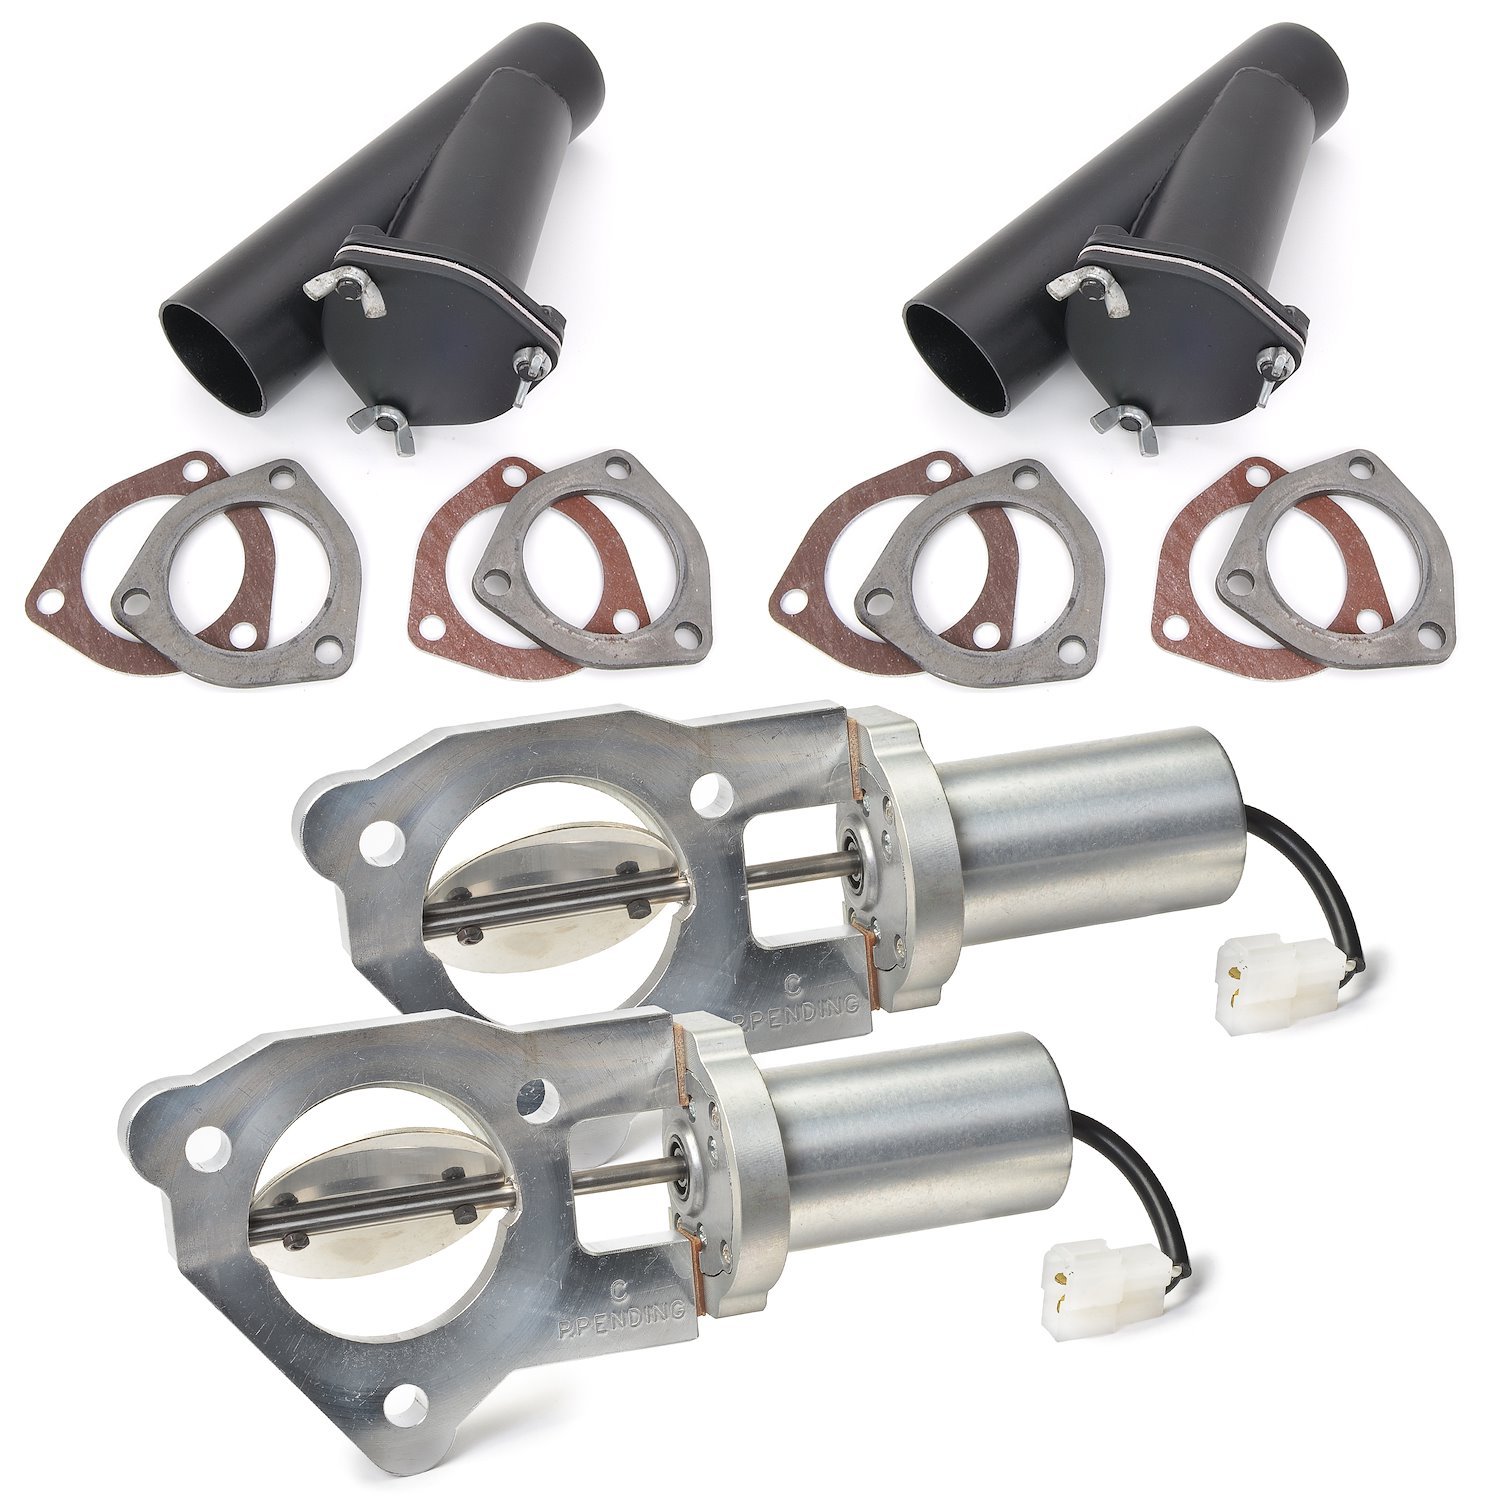 Electric Exhaust Cutout Kit for 2 1/2 in. O.D. Dual Exhaust Systems